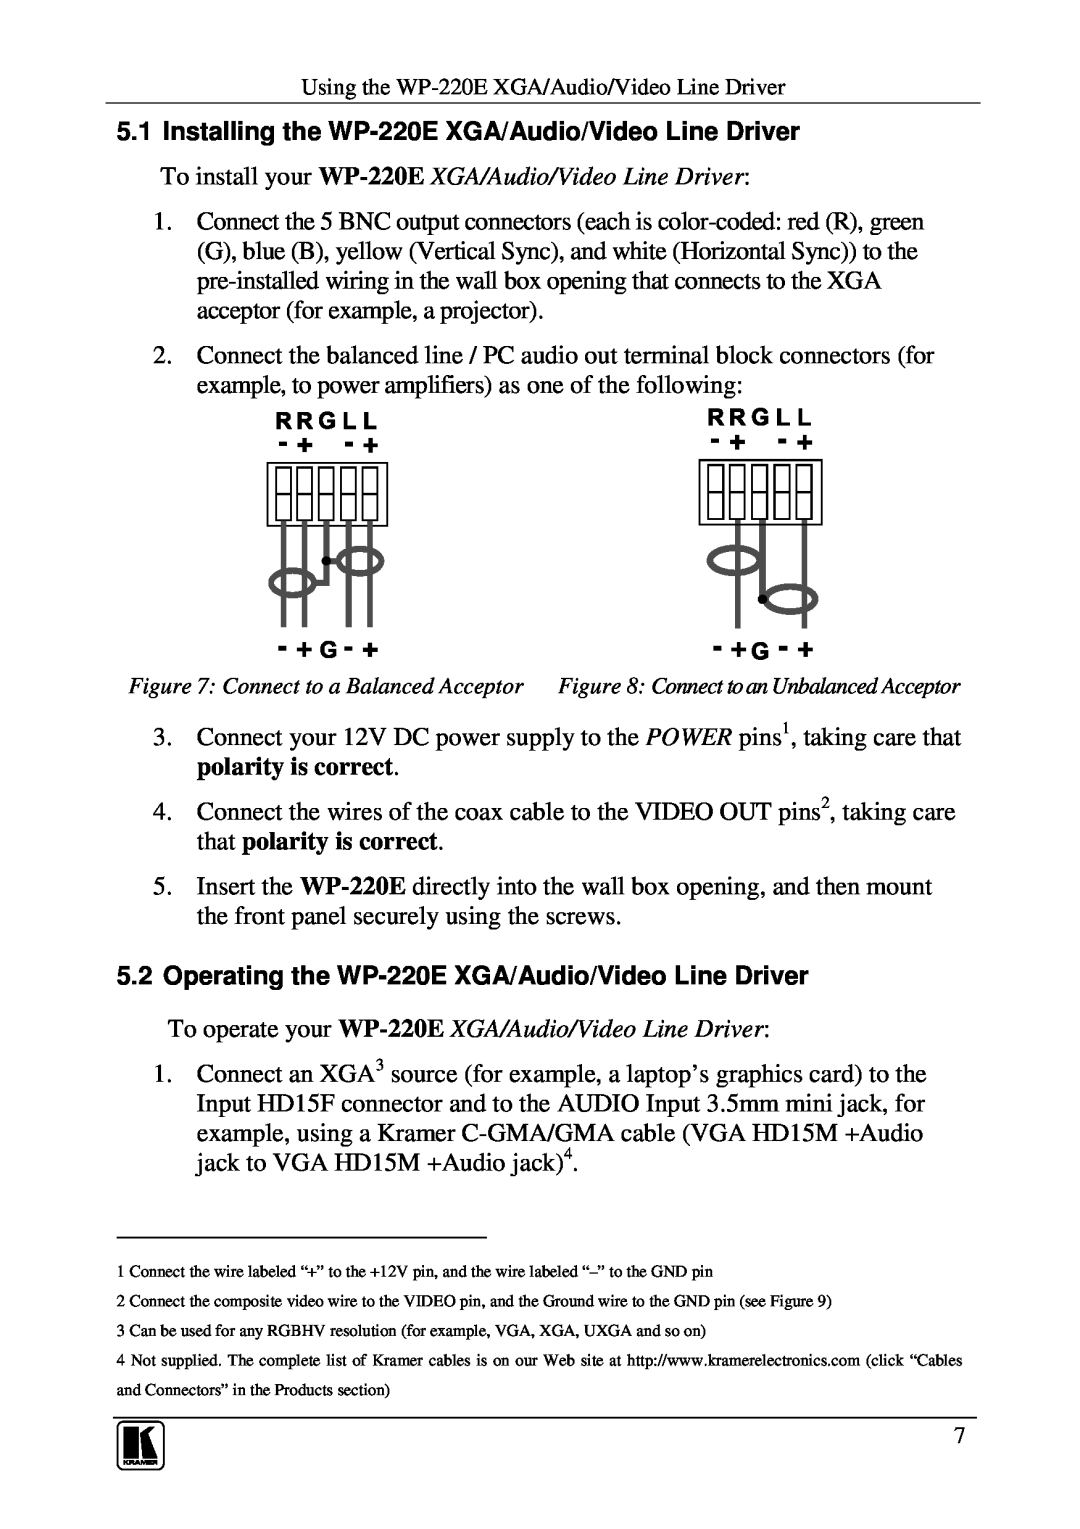 Kramer Electronics WP-220E user manual Connect to a Balanced Acceptor, Connect to an Unbalanced Acceptor 